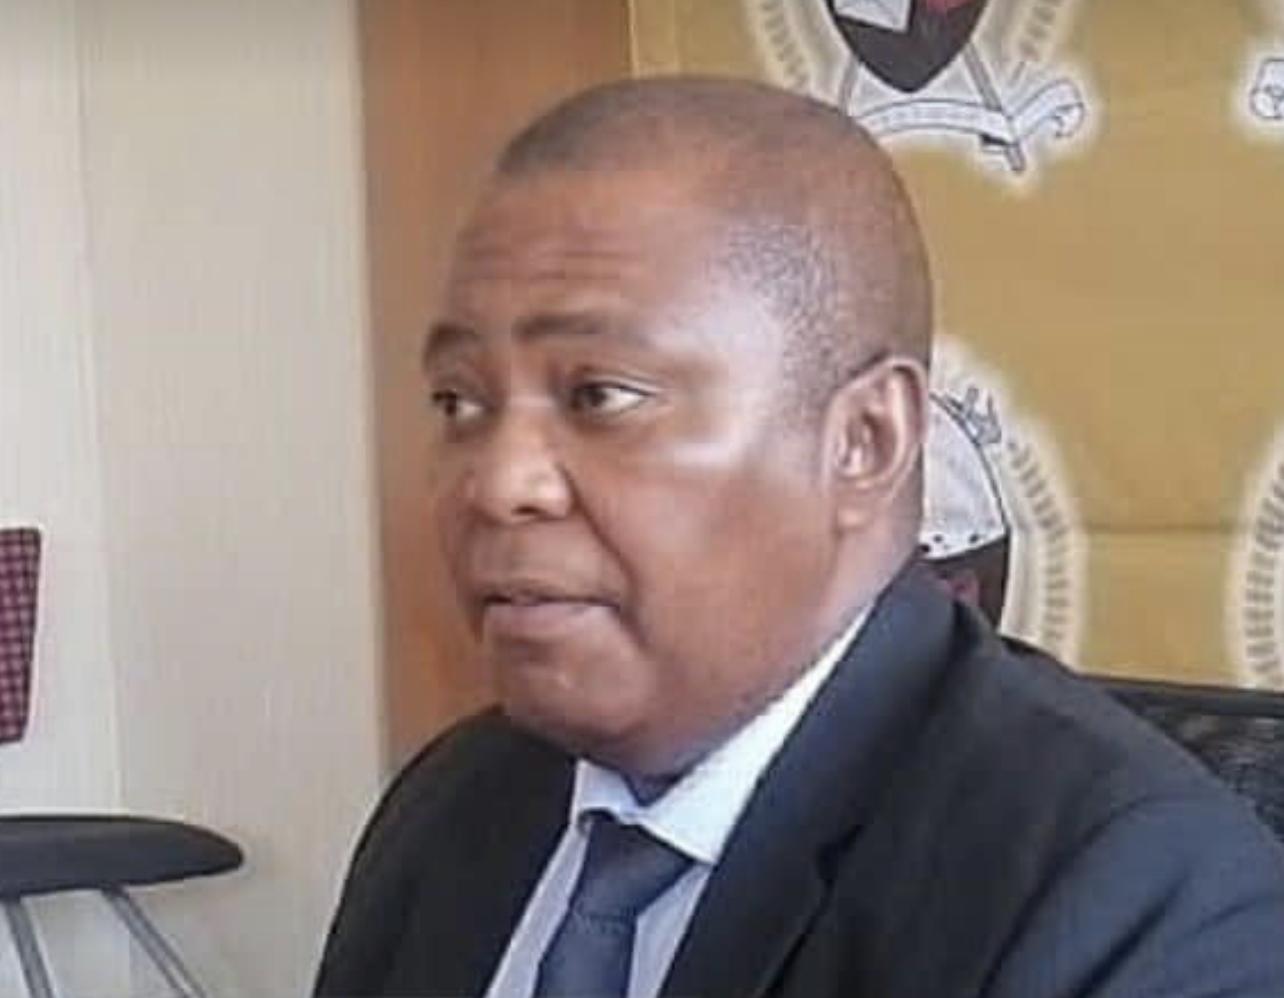 Eswatini Telecoms Managing Director Themba Khumalo introduces whistleblower service